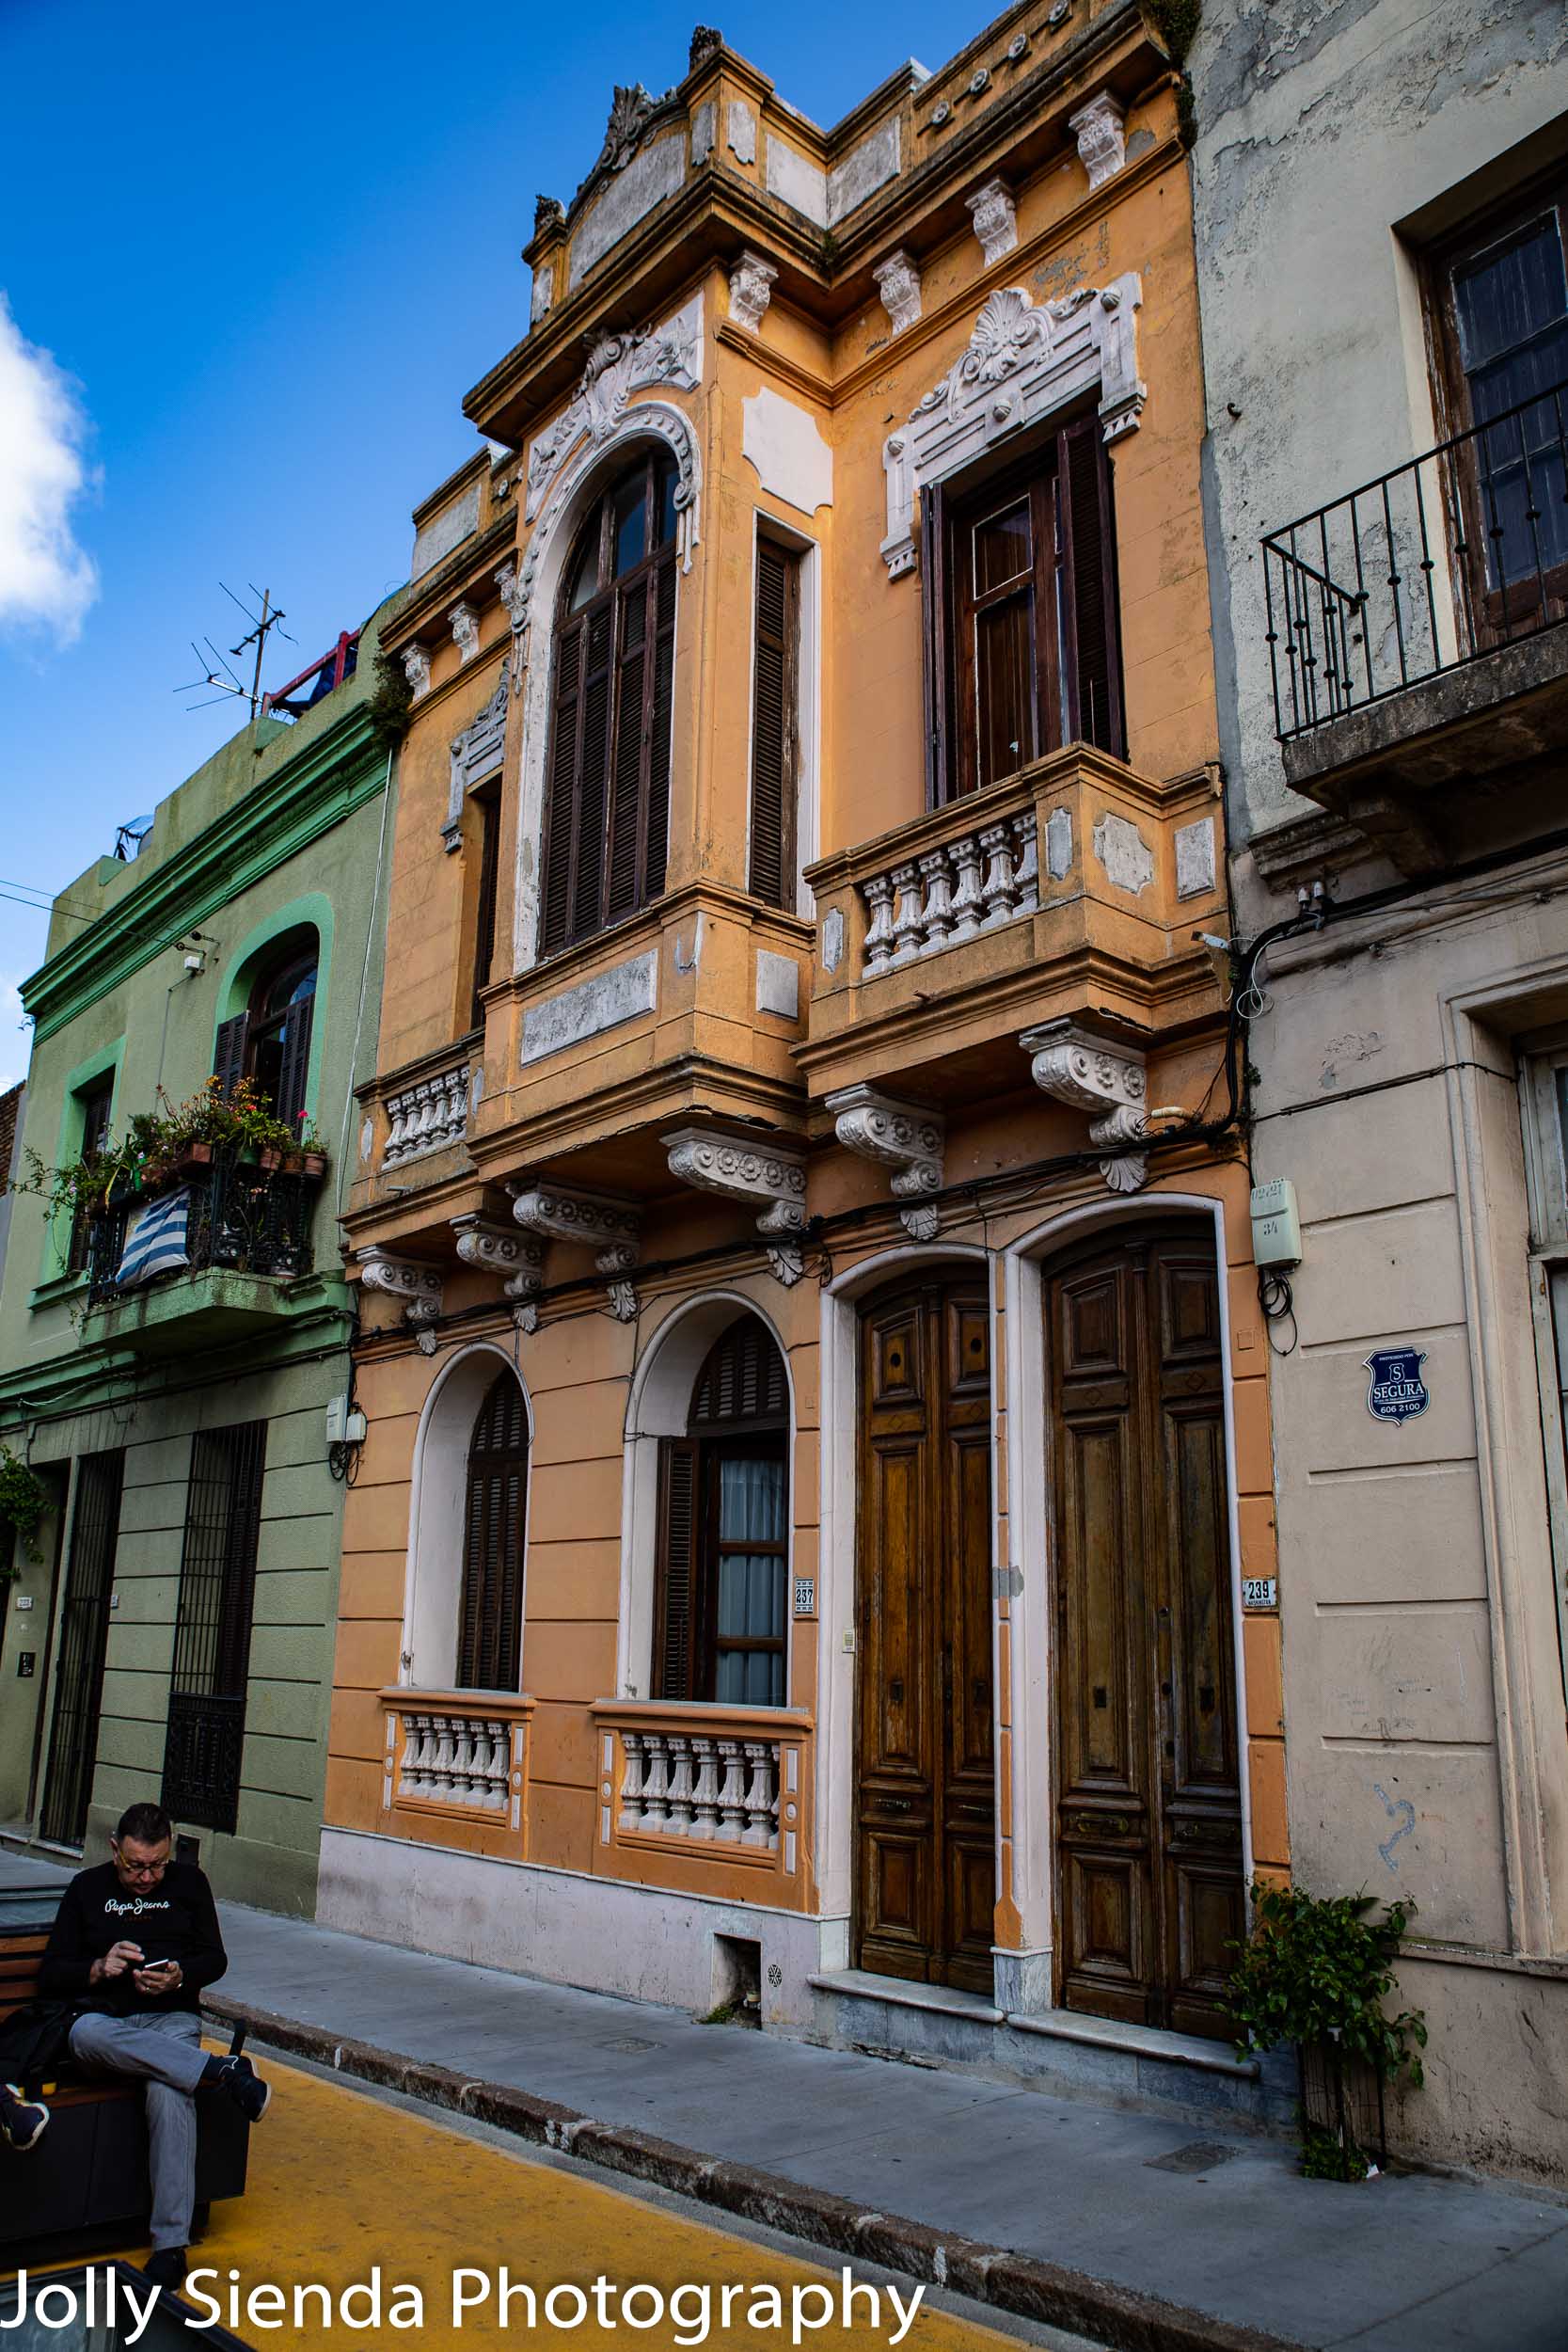 Colonial Spanish architecture, blanconies, and a man checking hi